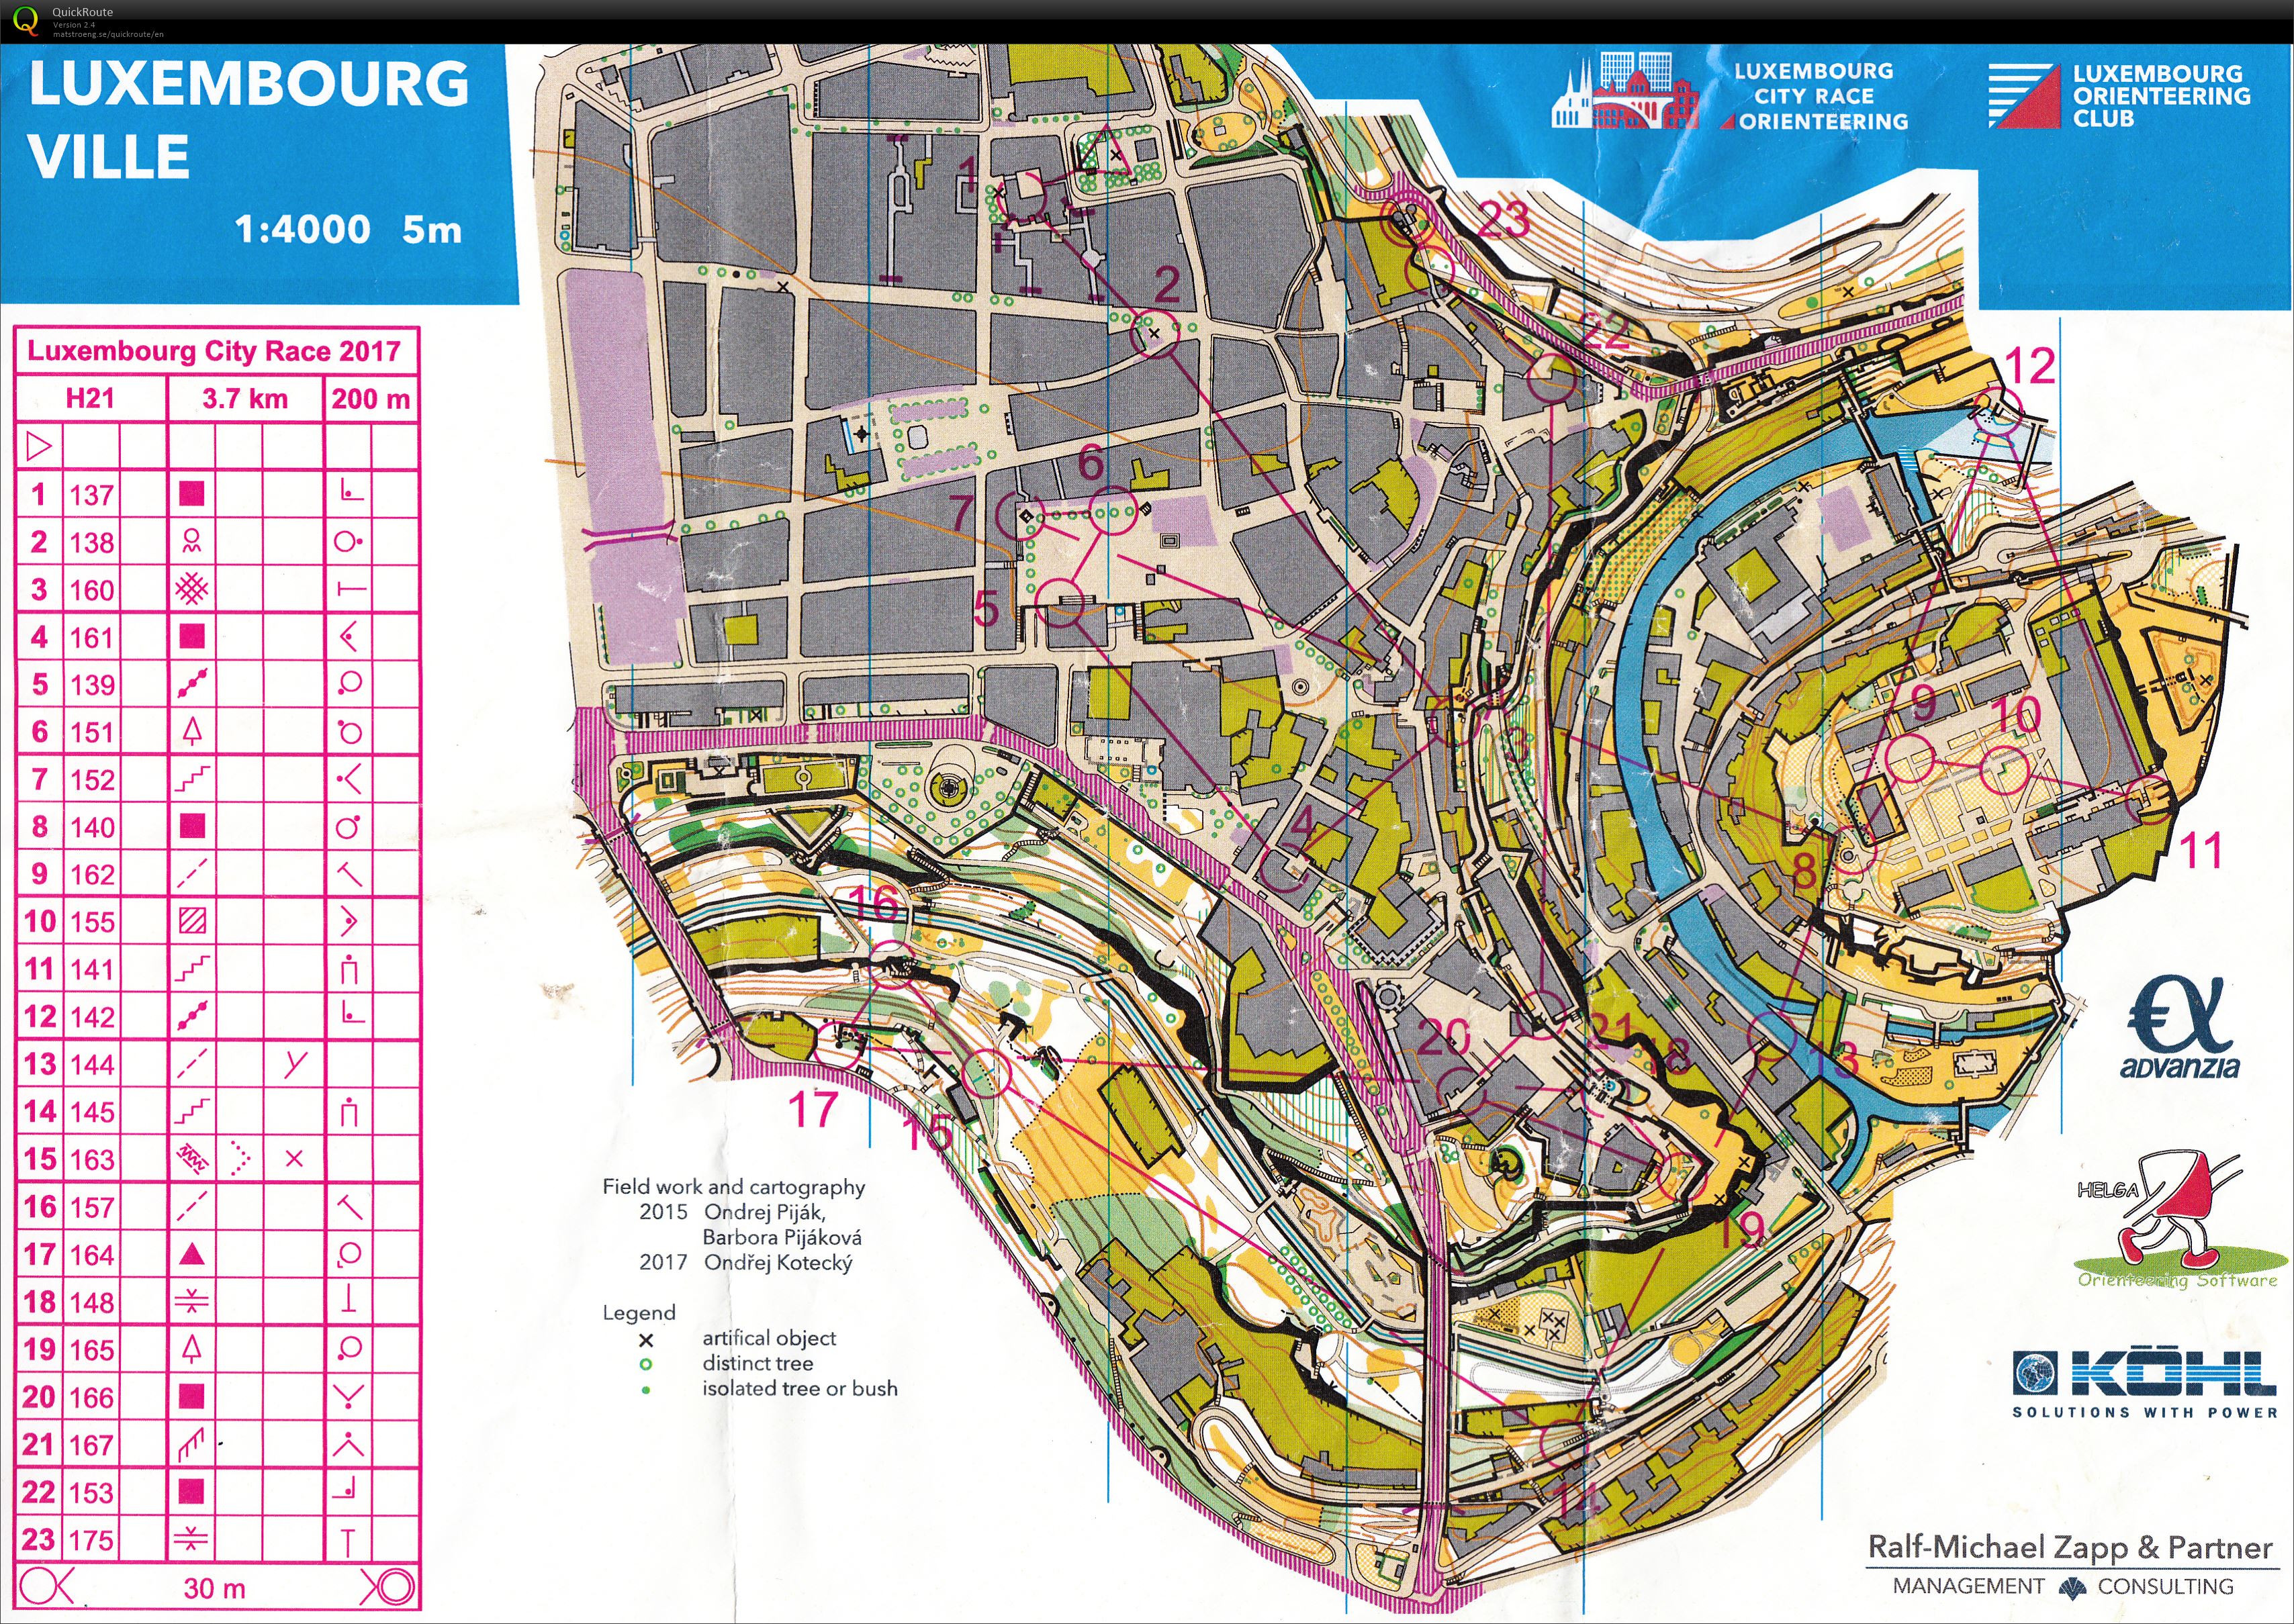 Luxembourg City Race (05.11.2017)